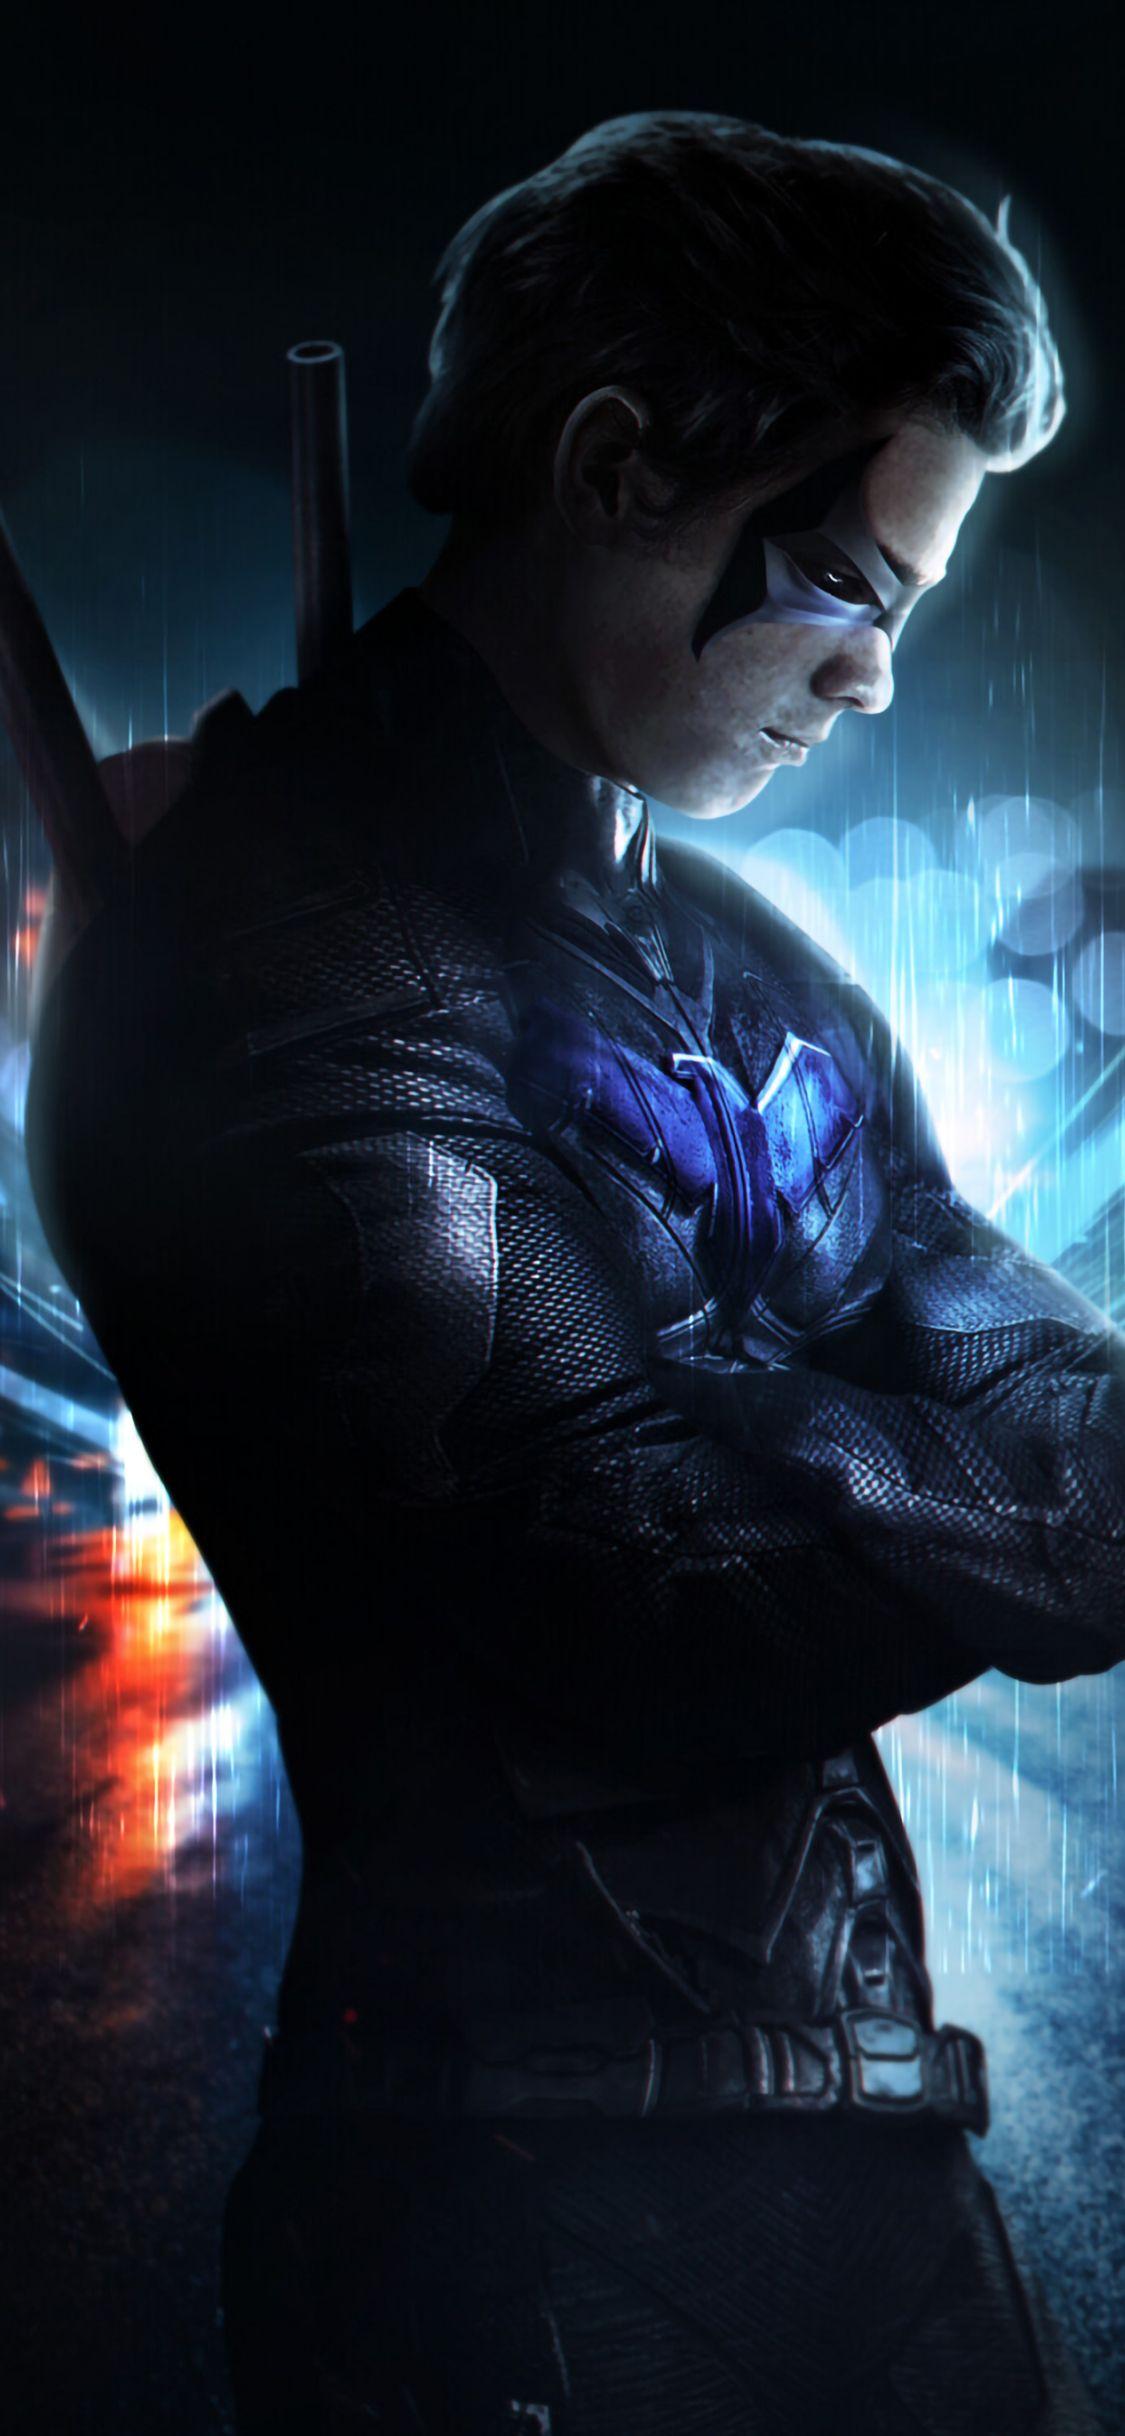 Fan Art I designed this Nightwing wallpaper for my iPhone last night  Thought Id share it in case anyone else would like to use it  rDCcomics